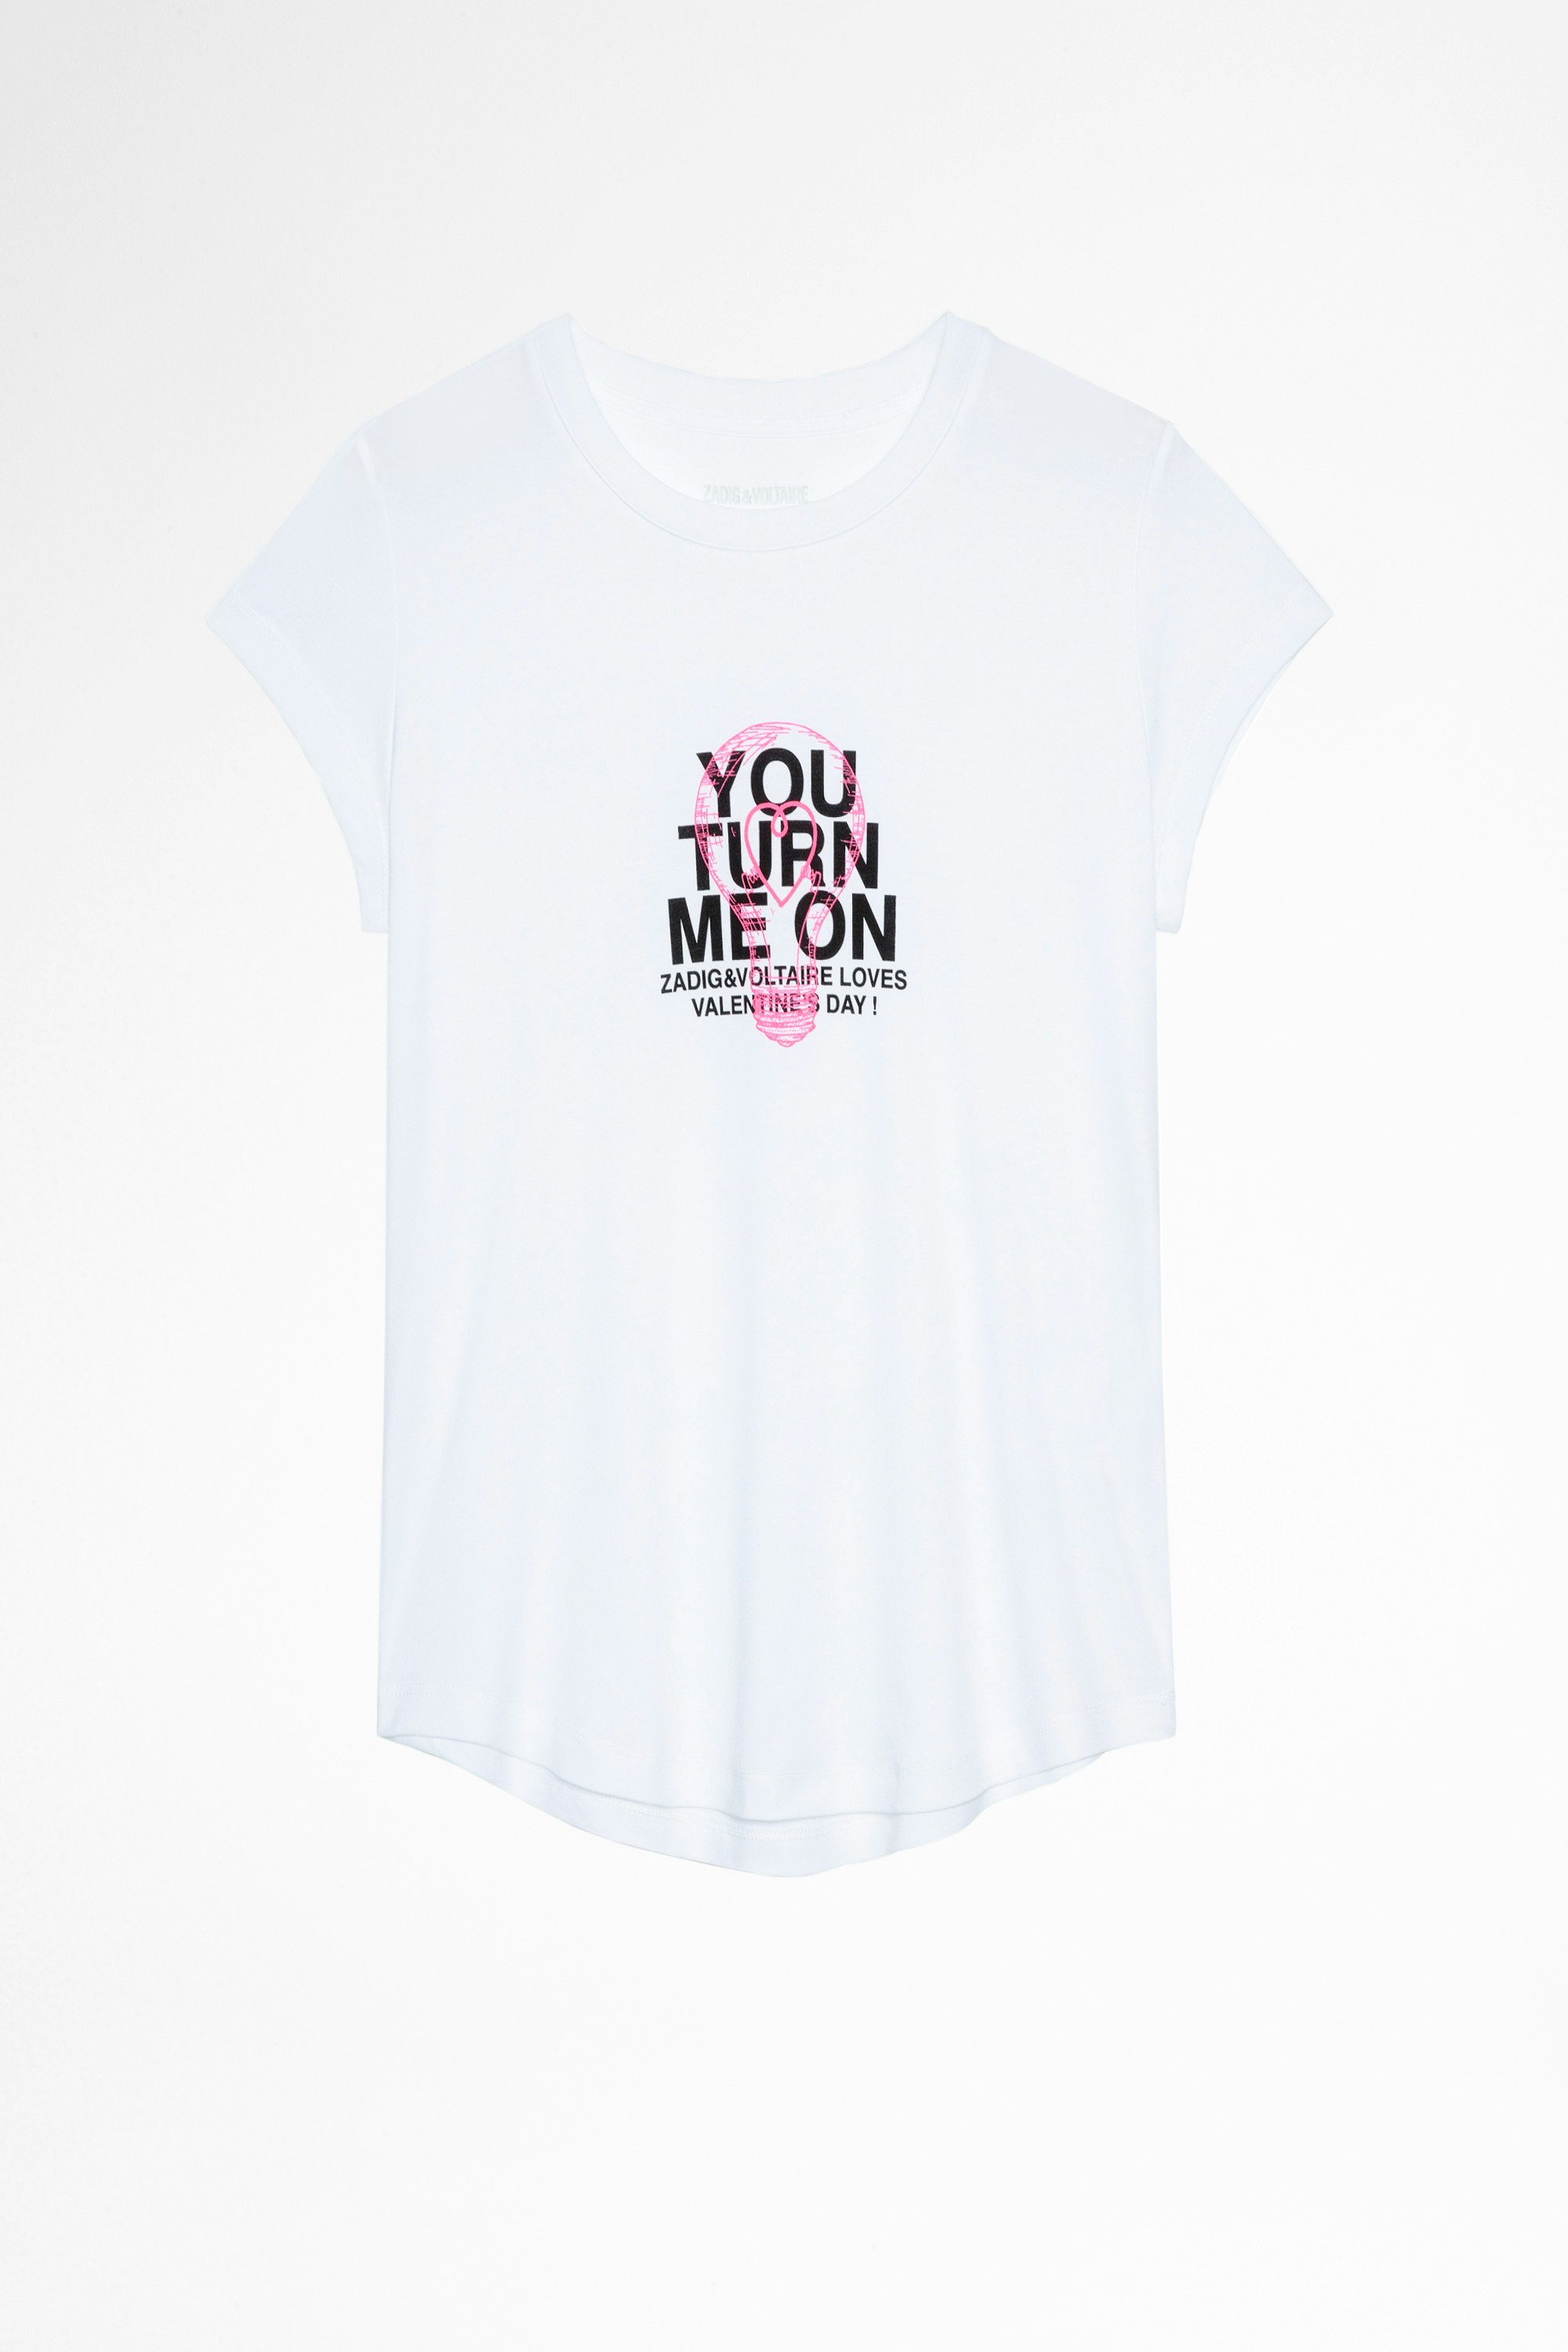 Woop you turn me on Ｔシャツ Women's white cotton t-shirt with You turn me on slogan. Made with fibers from organic farming.